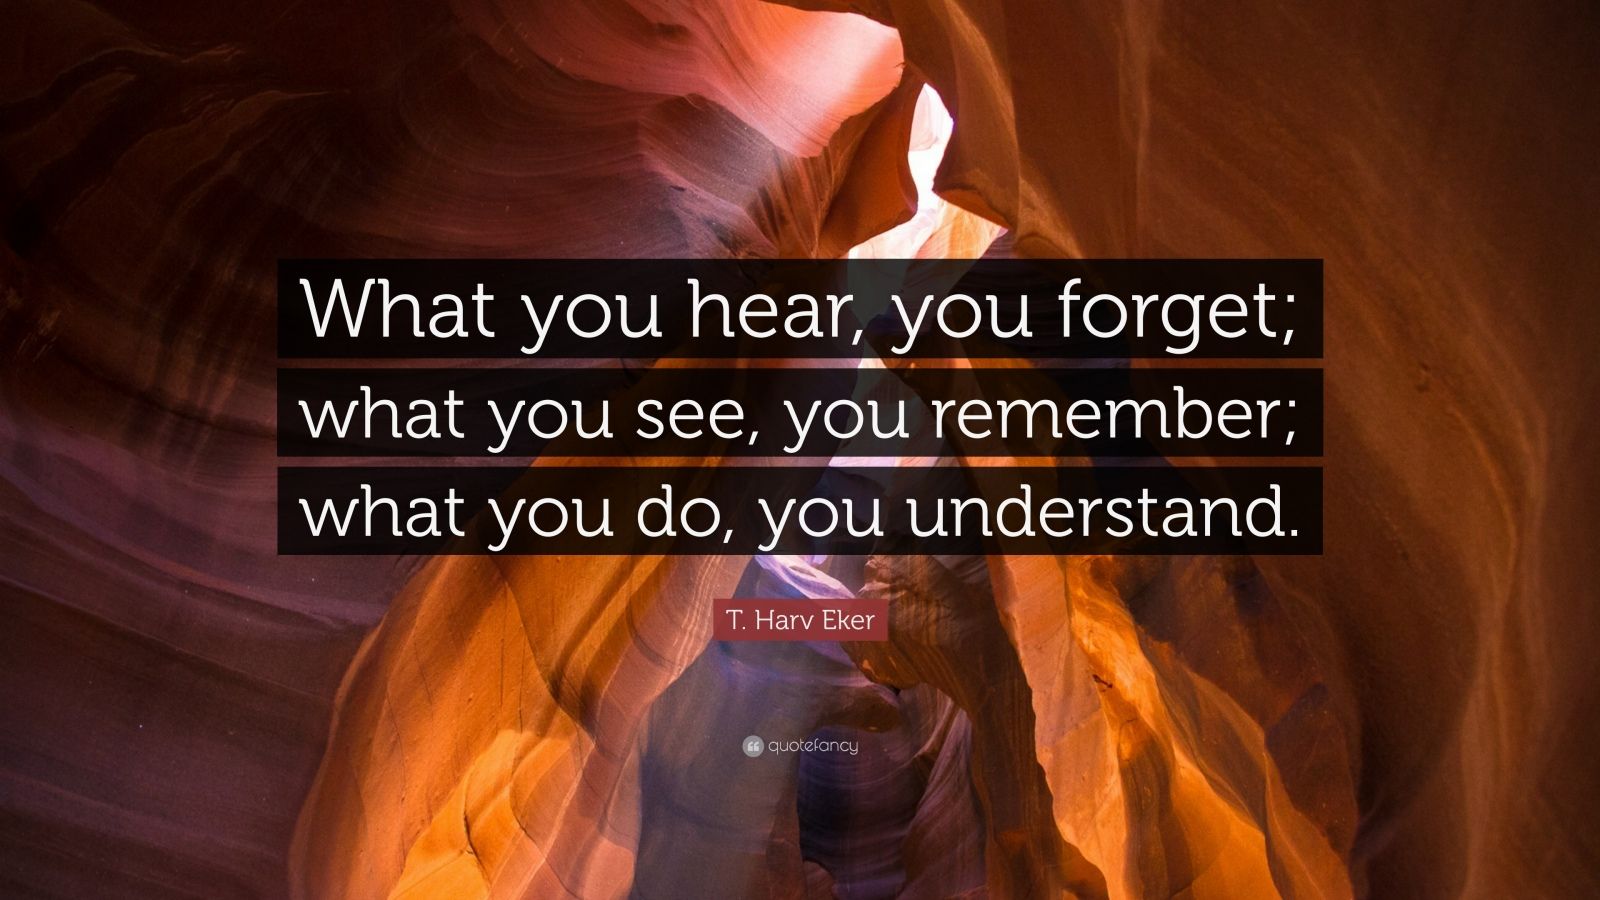 T. Harv Eker Quote: “What you hear, you forget; what you see, you